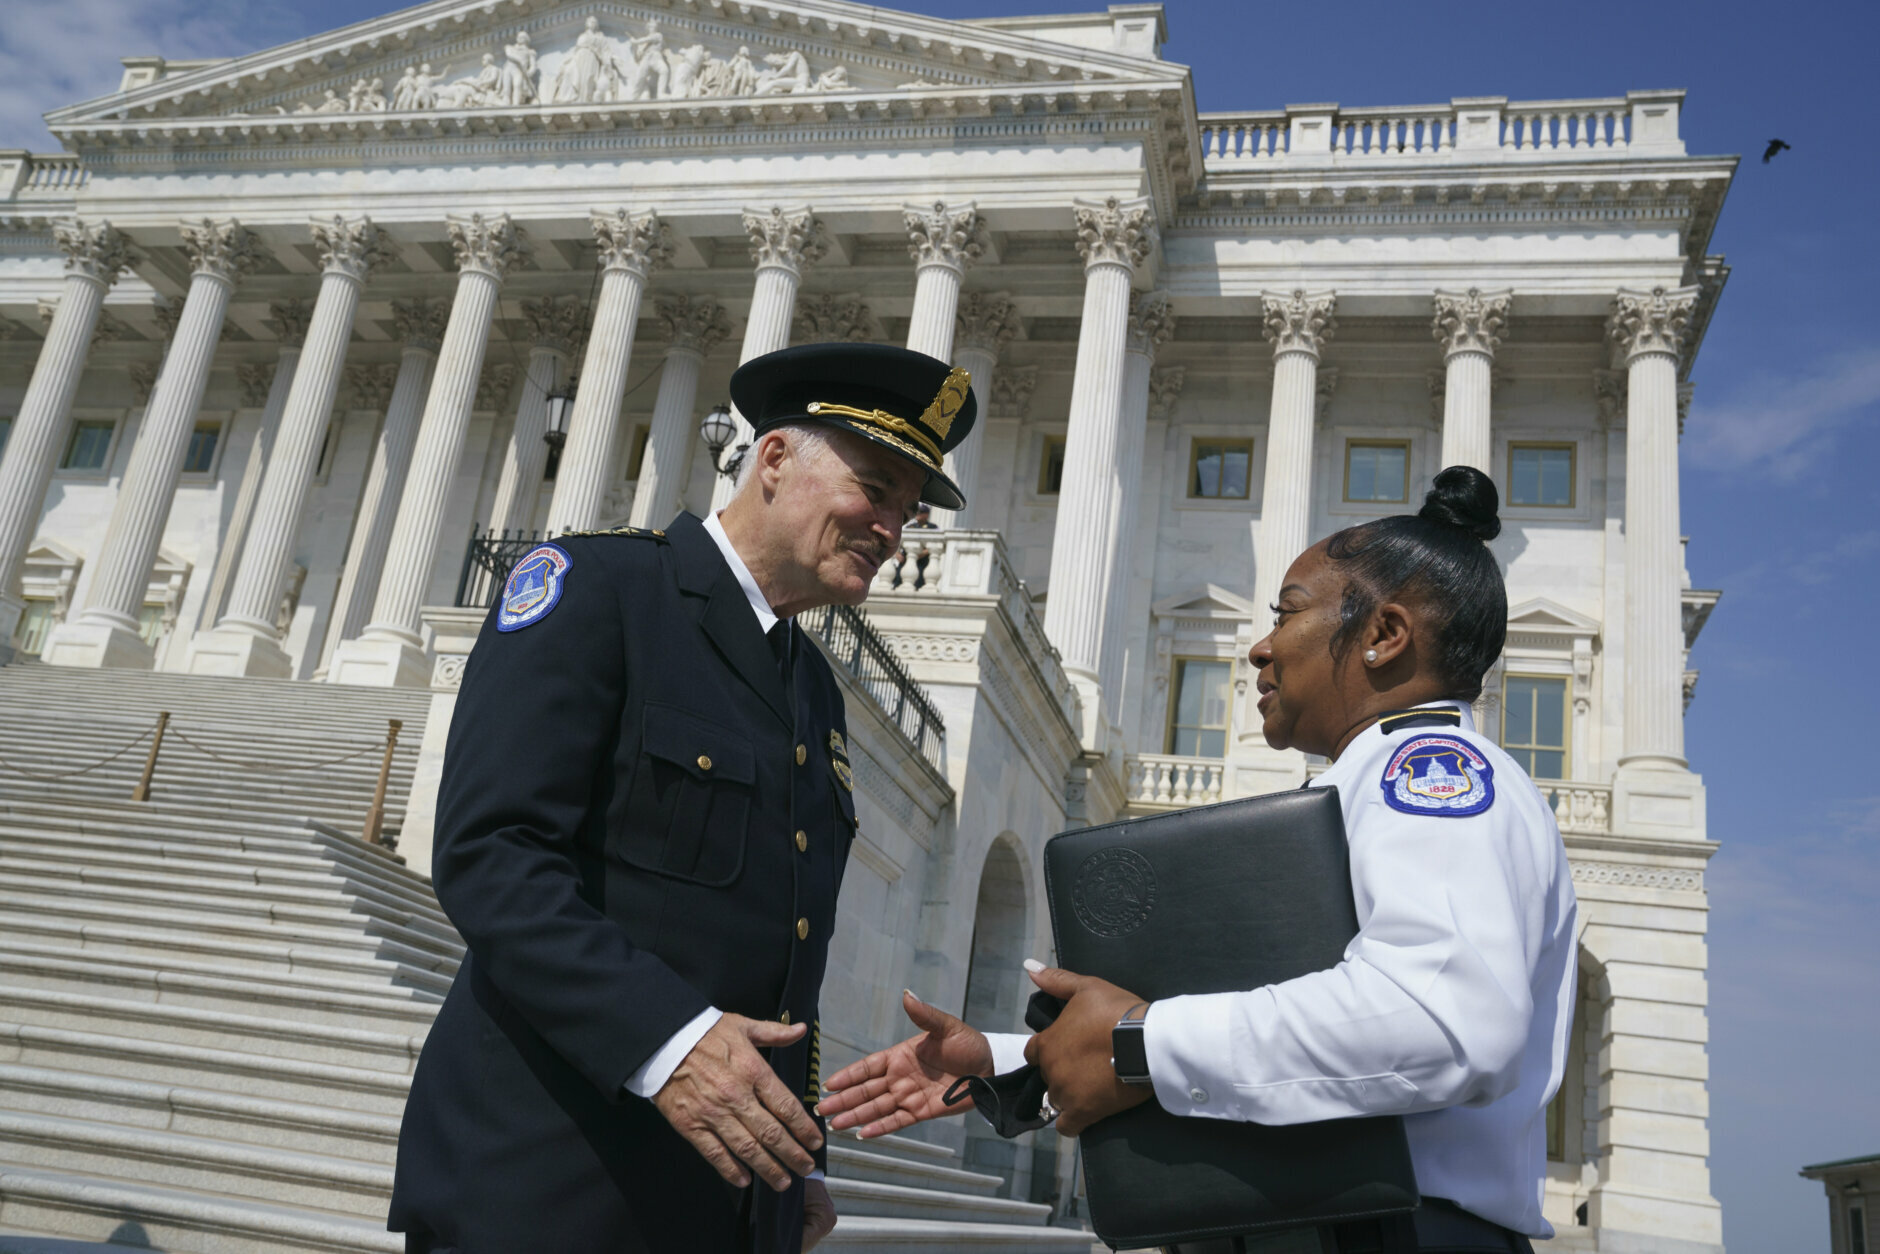 J. Thomas Manger, left, a veteran police chief of departments in the Washington, D.C., region, is welcomed by interim acting Capitol Police chief Yogananda Pittman, to the Capitol in Washington, Friday, July 23, 2021, as he takes over the United States Capitol Police following the resignations of the previous leadership after the Jan. 6 insurrection. (AP Photo/J. Scott Applewhite)